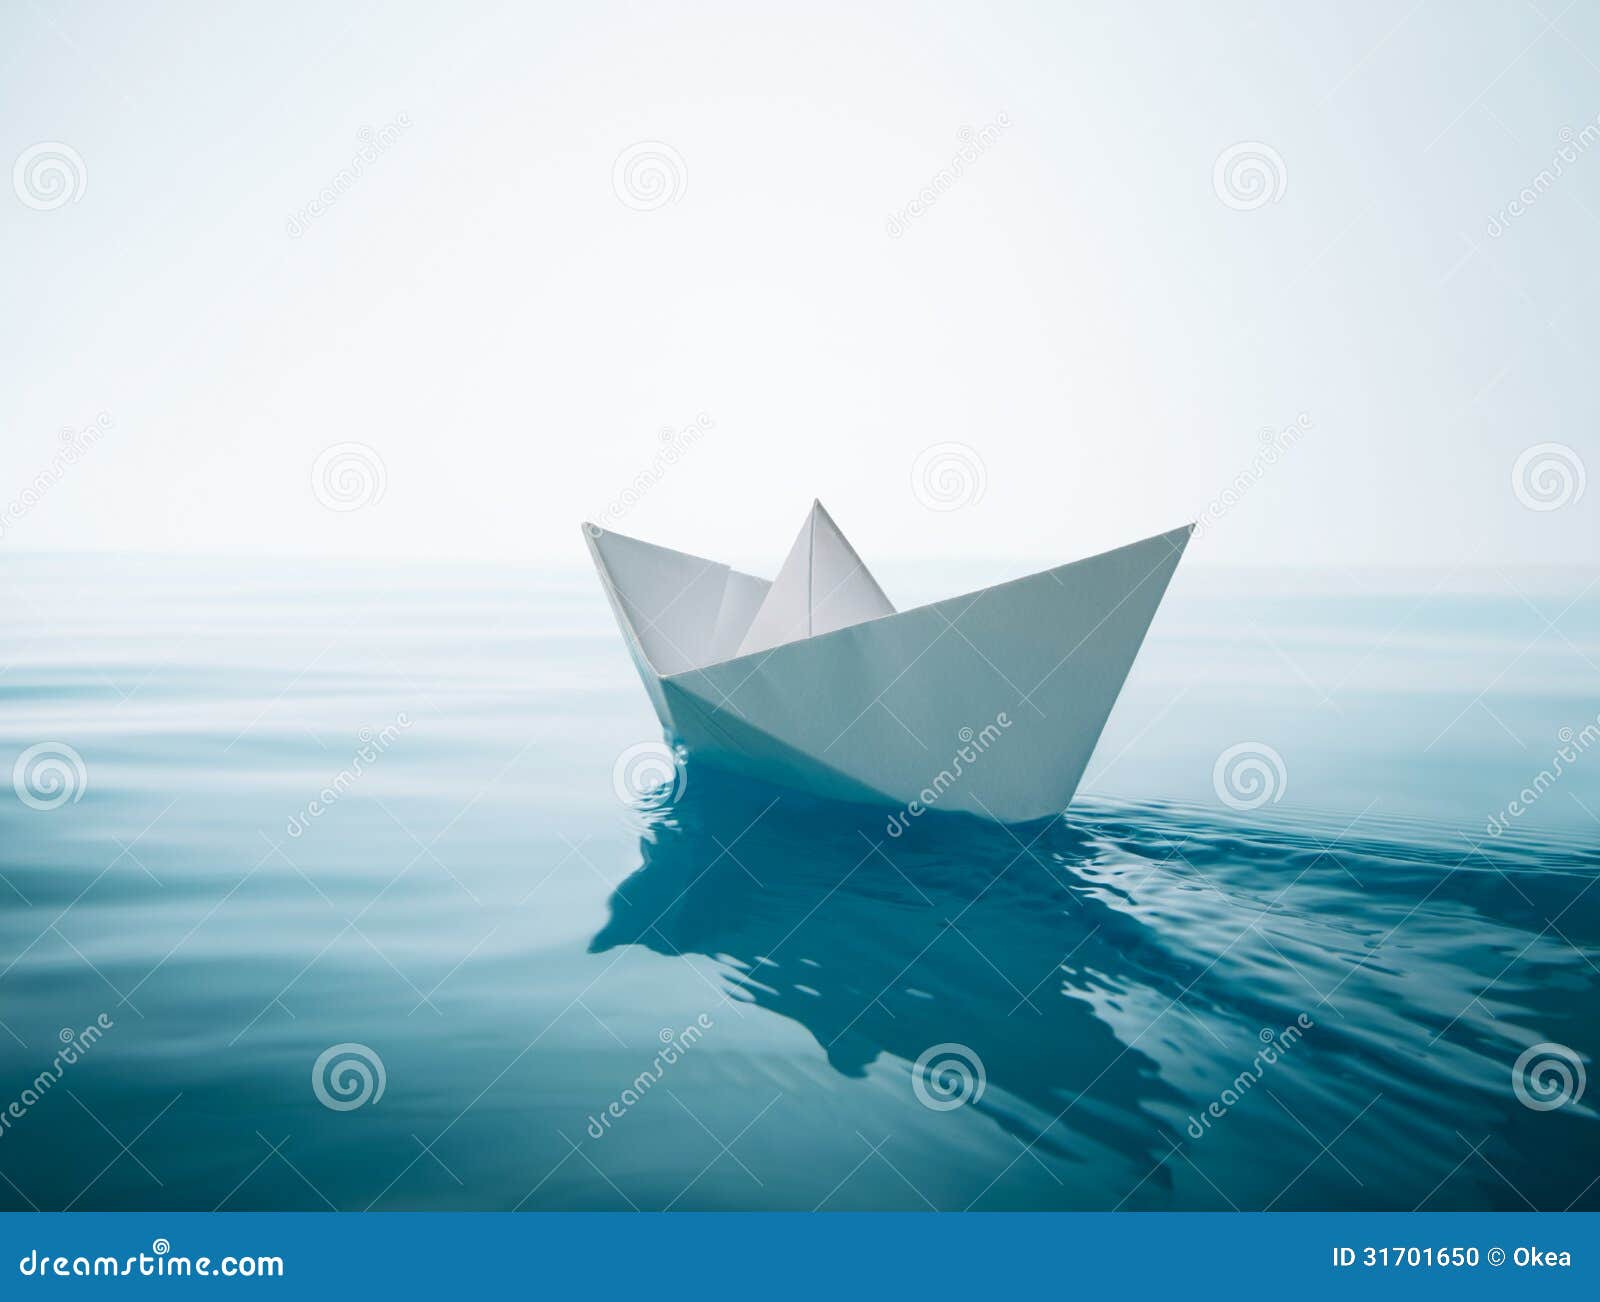 paper boat in water